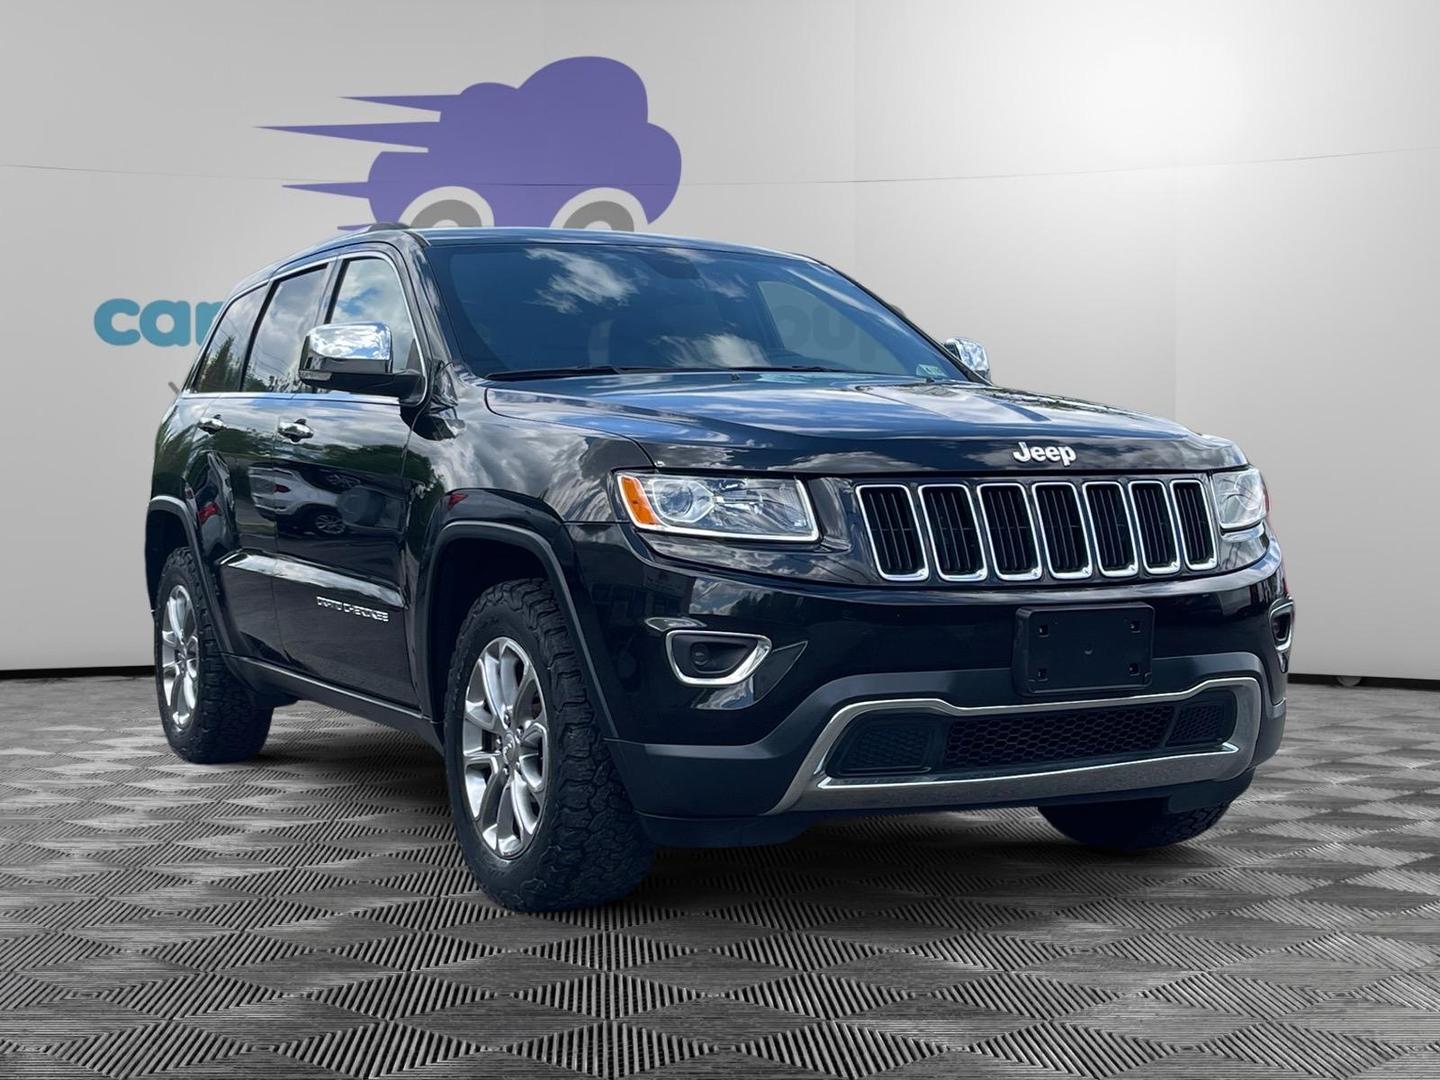 2015 Jeep Grand Cherokee Utility 4d Limited 4wd 3.0l V6 T-diesel - Image 7